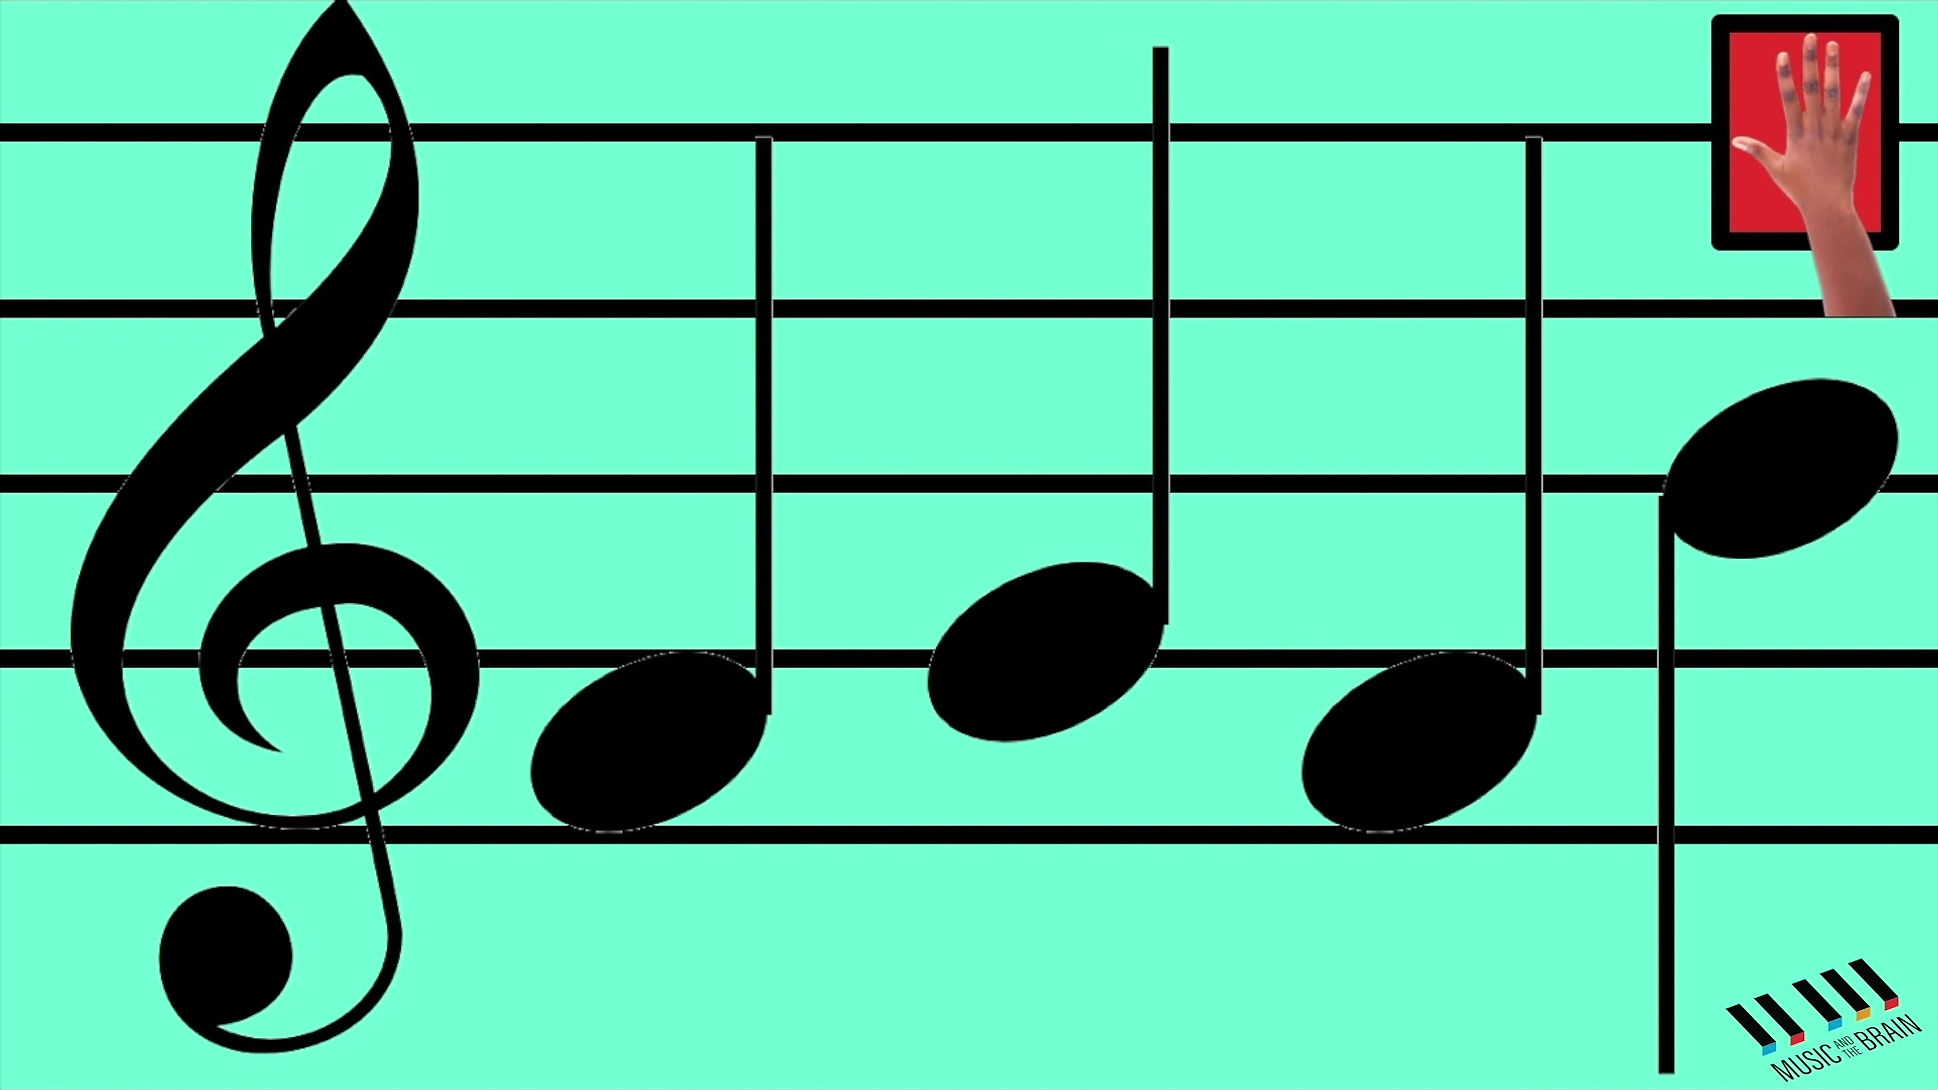 14. Treble Clef and Bass Clef